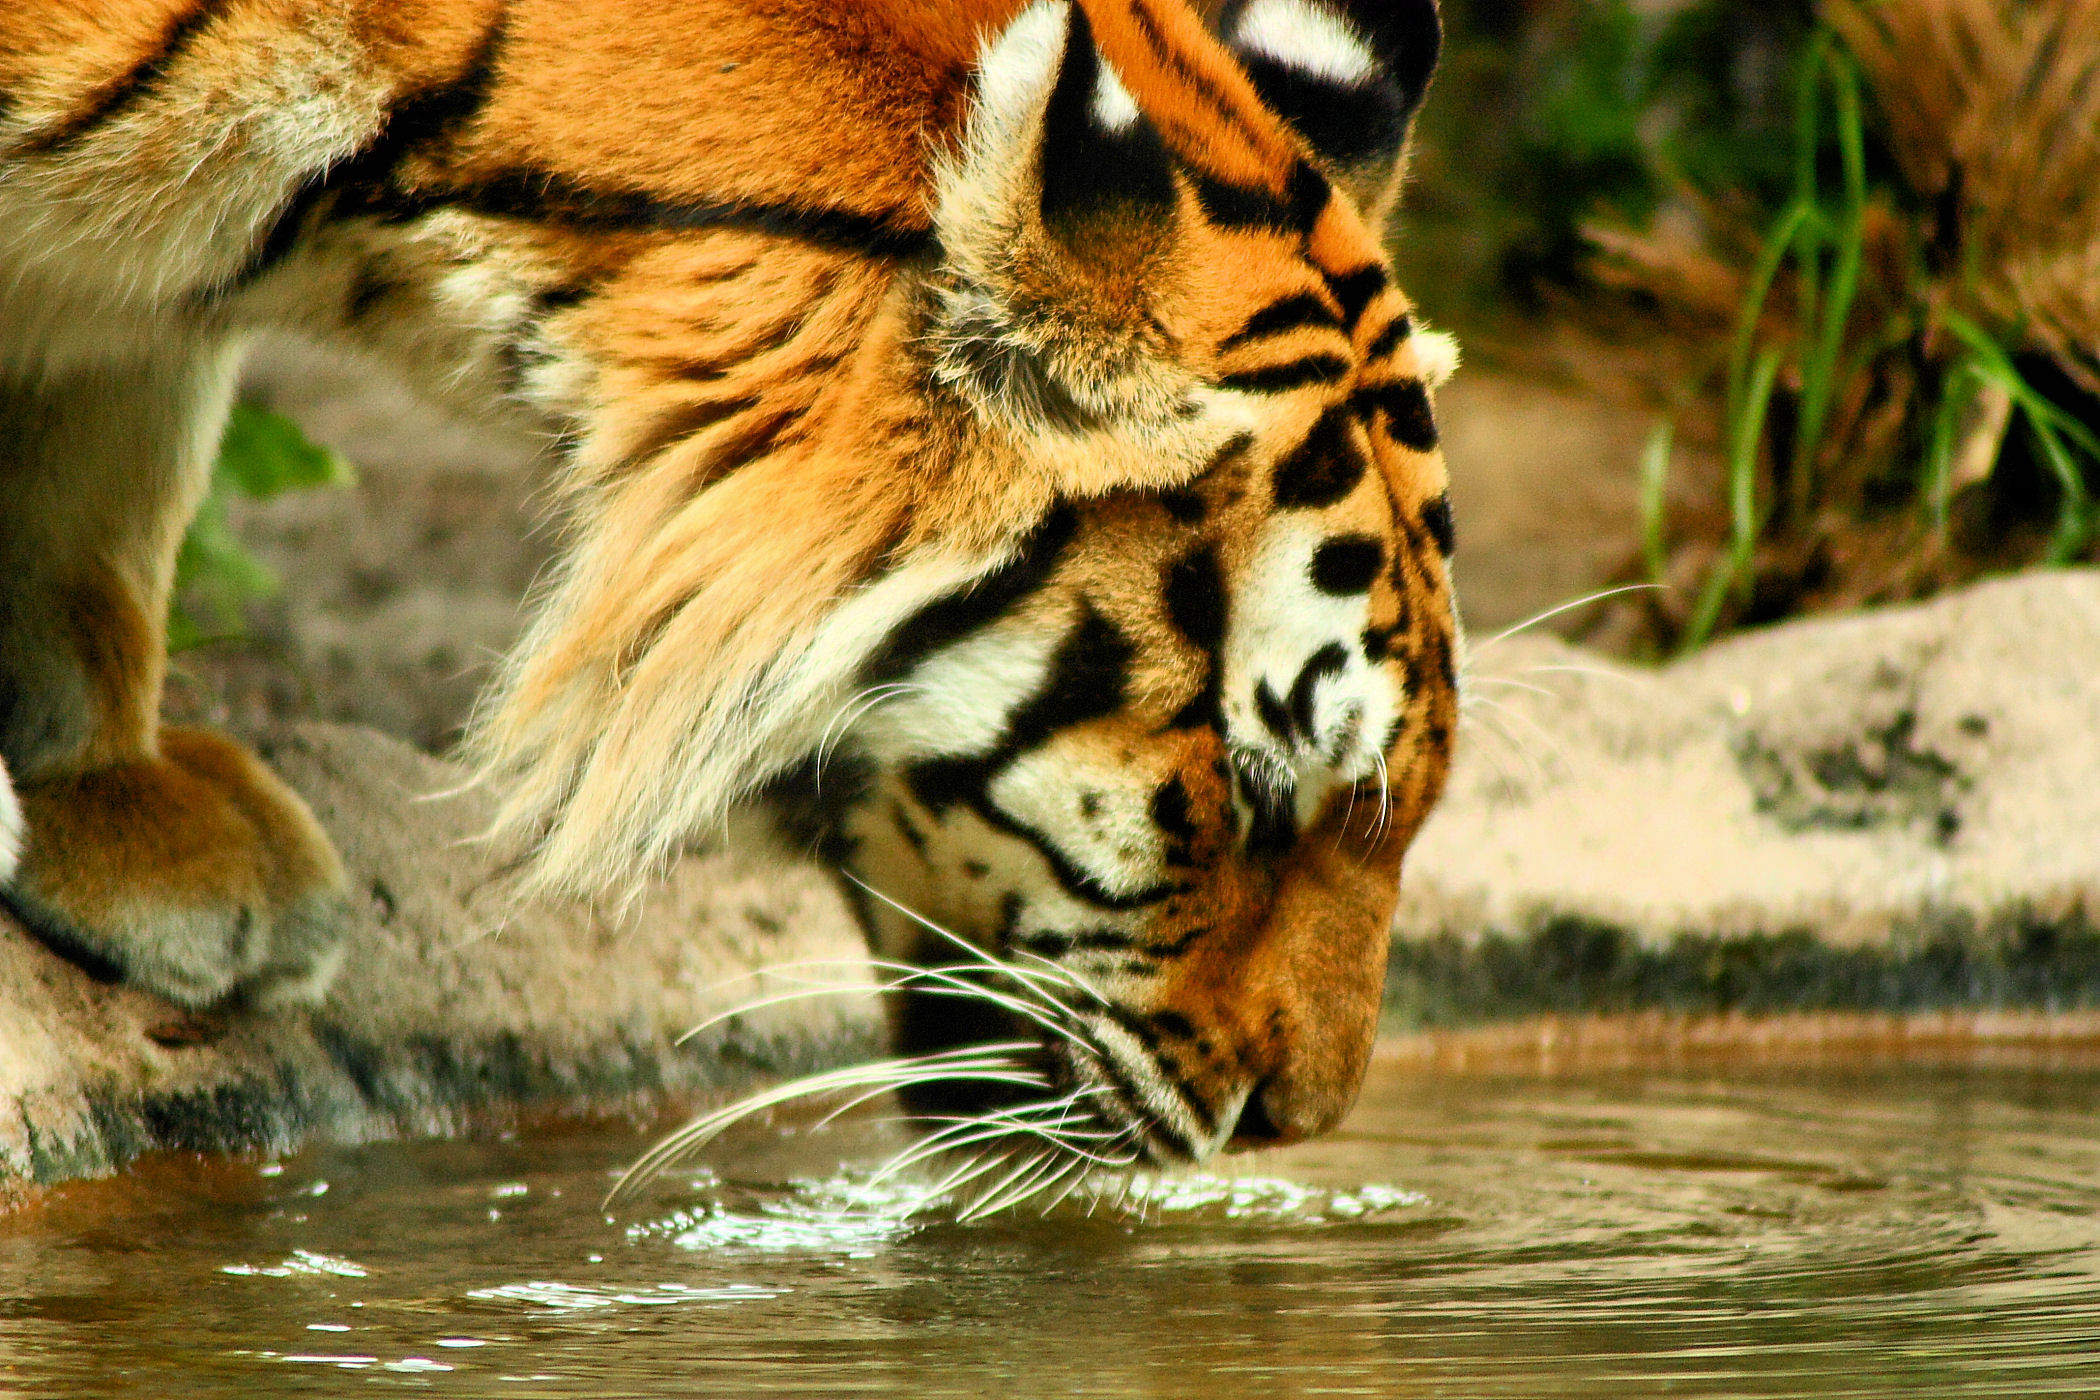 Tiger drinking water photo